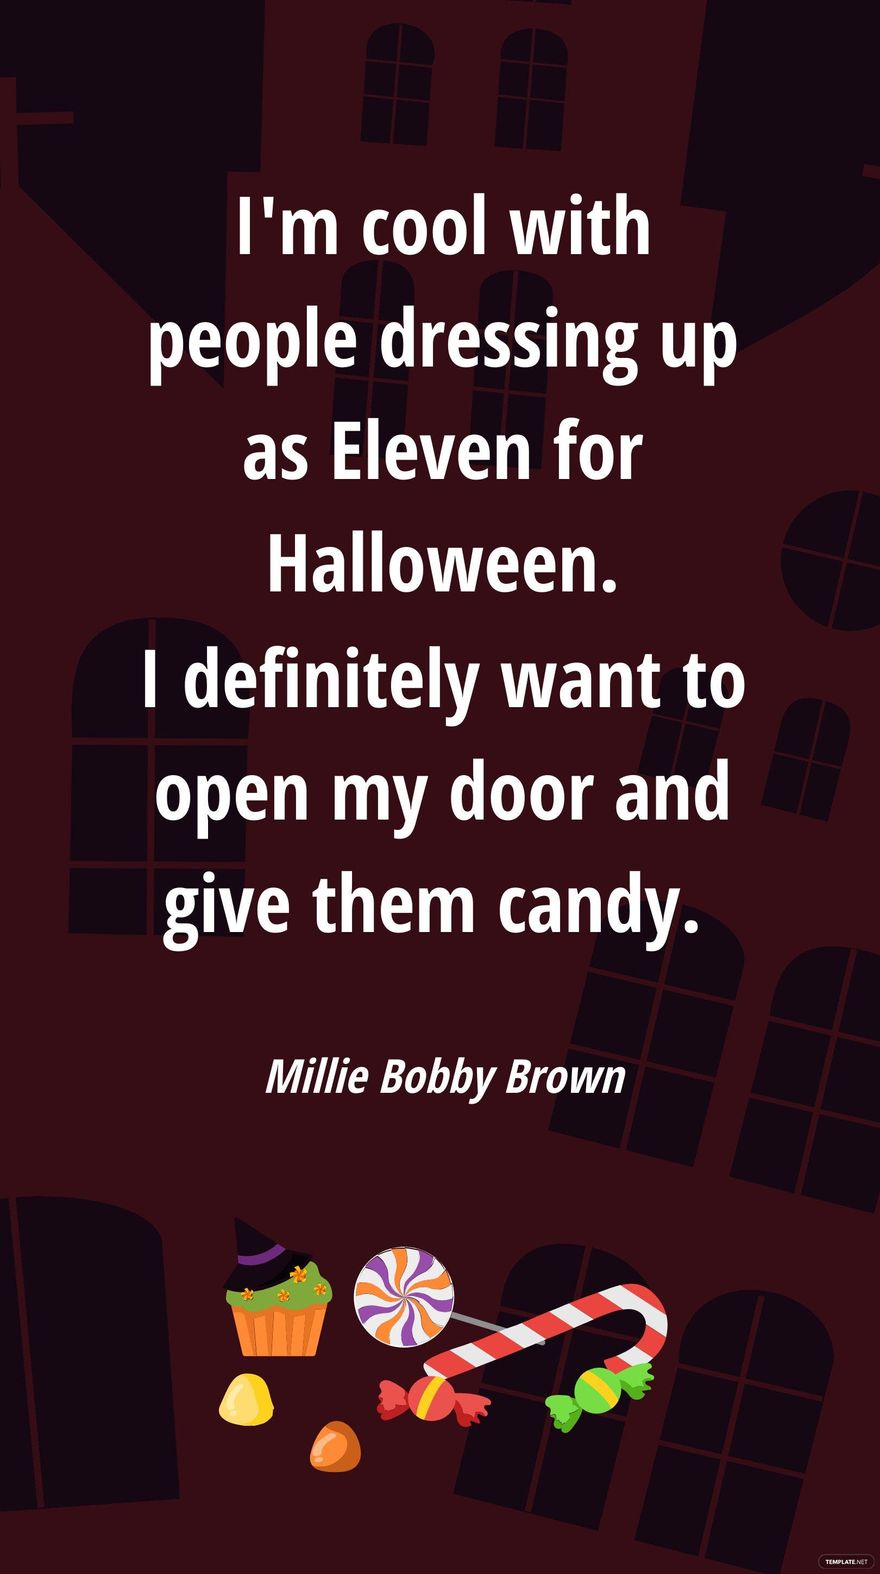 Millie Bobby Brown - I'm cool with people dressing up as Eleven for Halloween. I definitely want to open my door and give them candy. in JPG